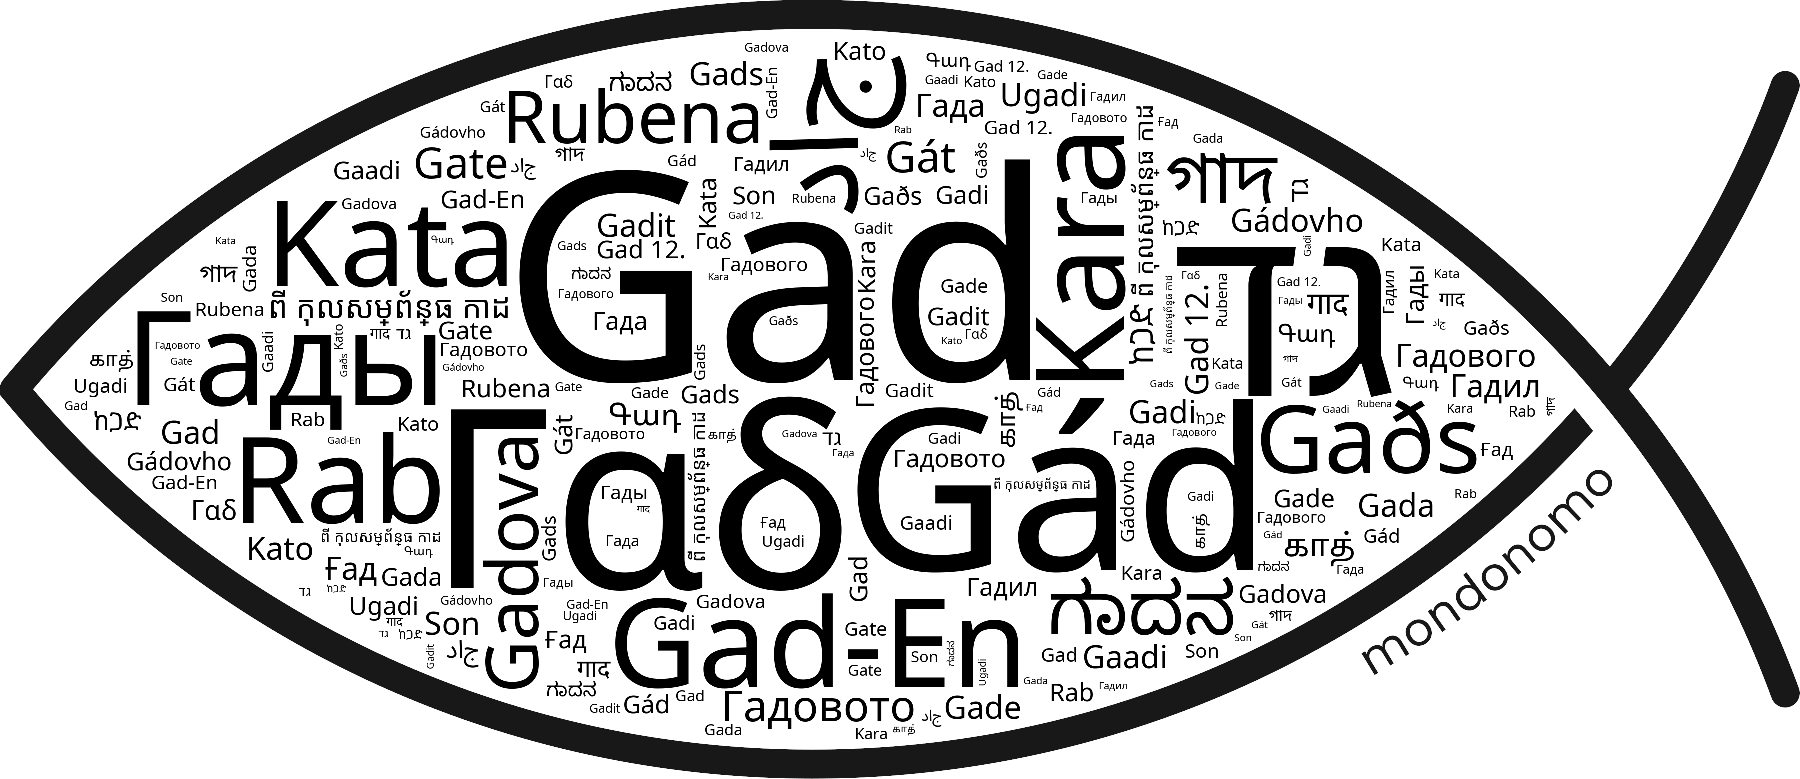 Name Gad in the world's Bibles